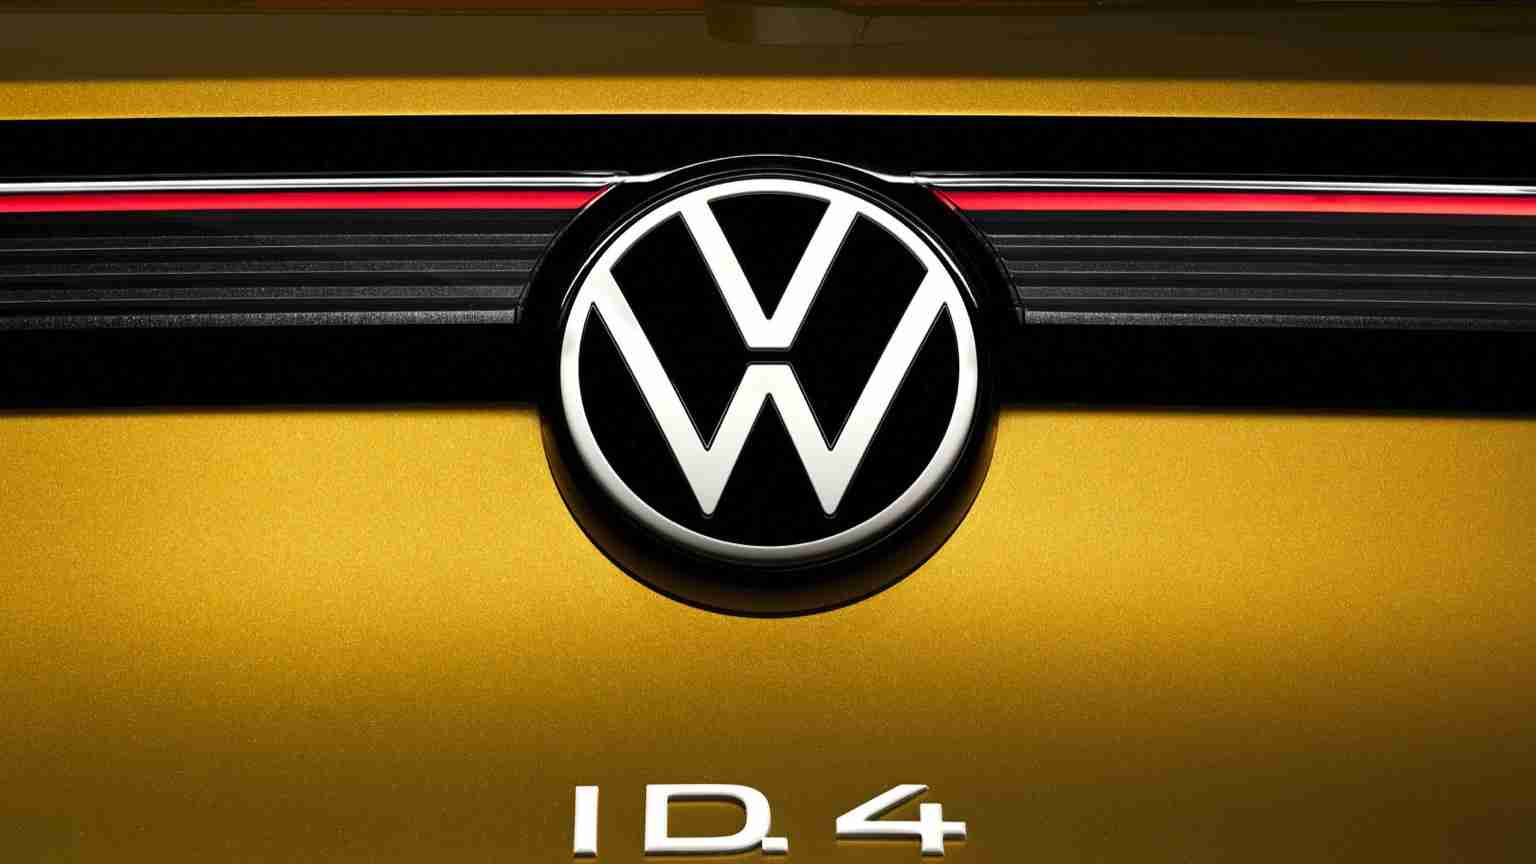 Volkswagen ID4 Pure Performance Lease Details